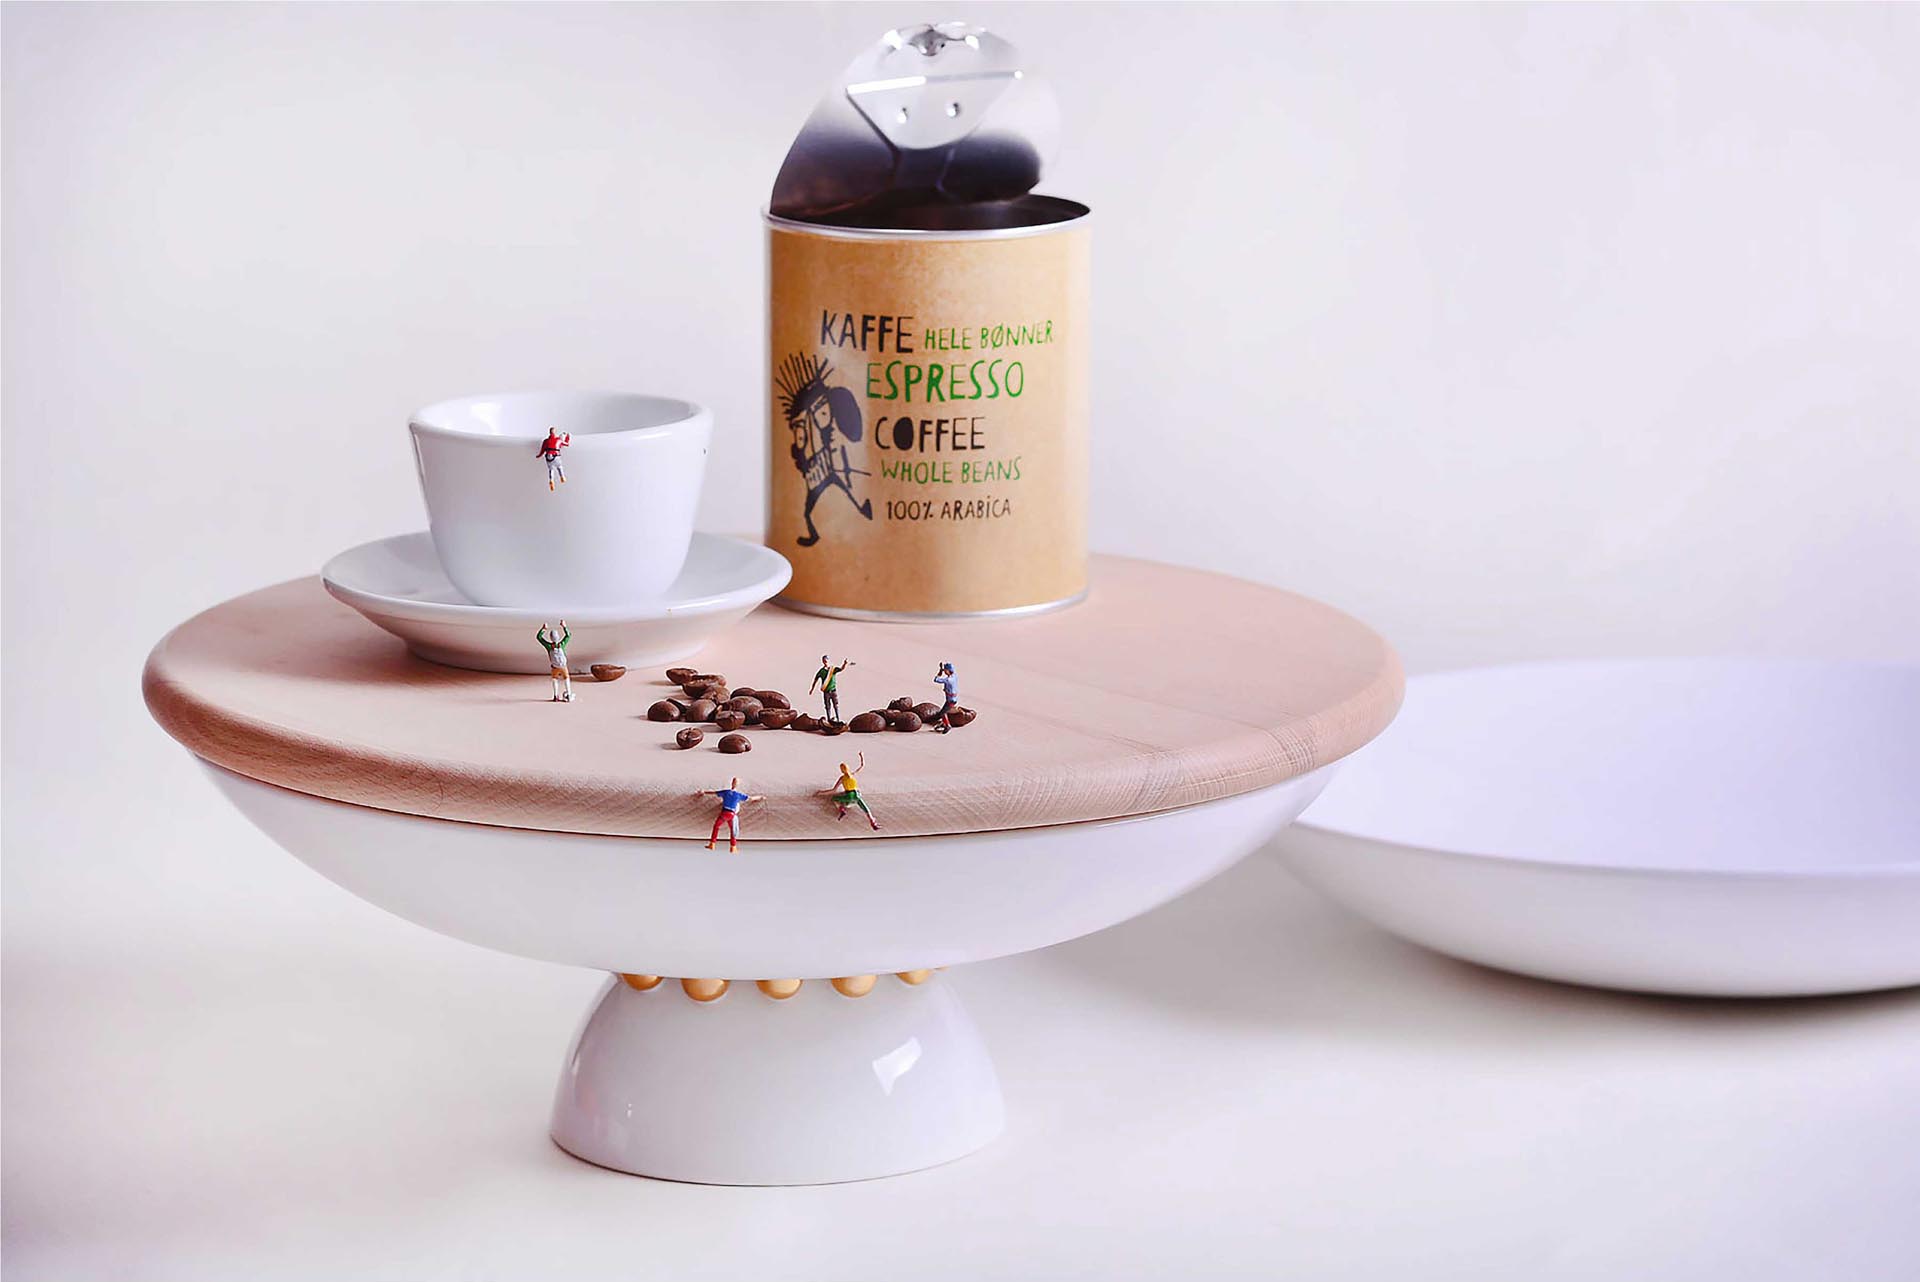 Entrèe Multifunctional Table Set by Laura Calligari